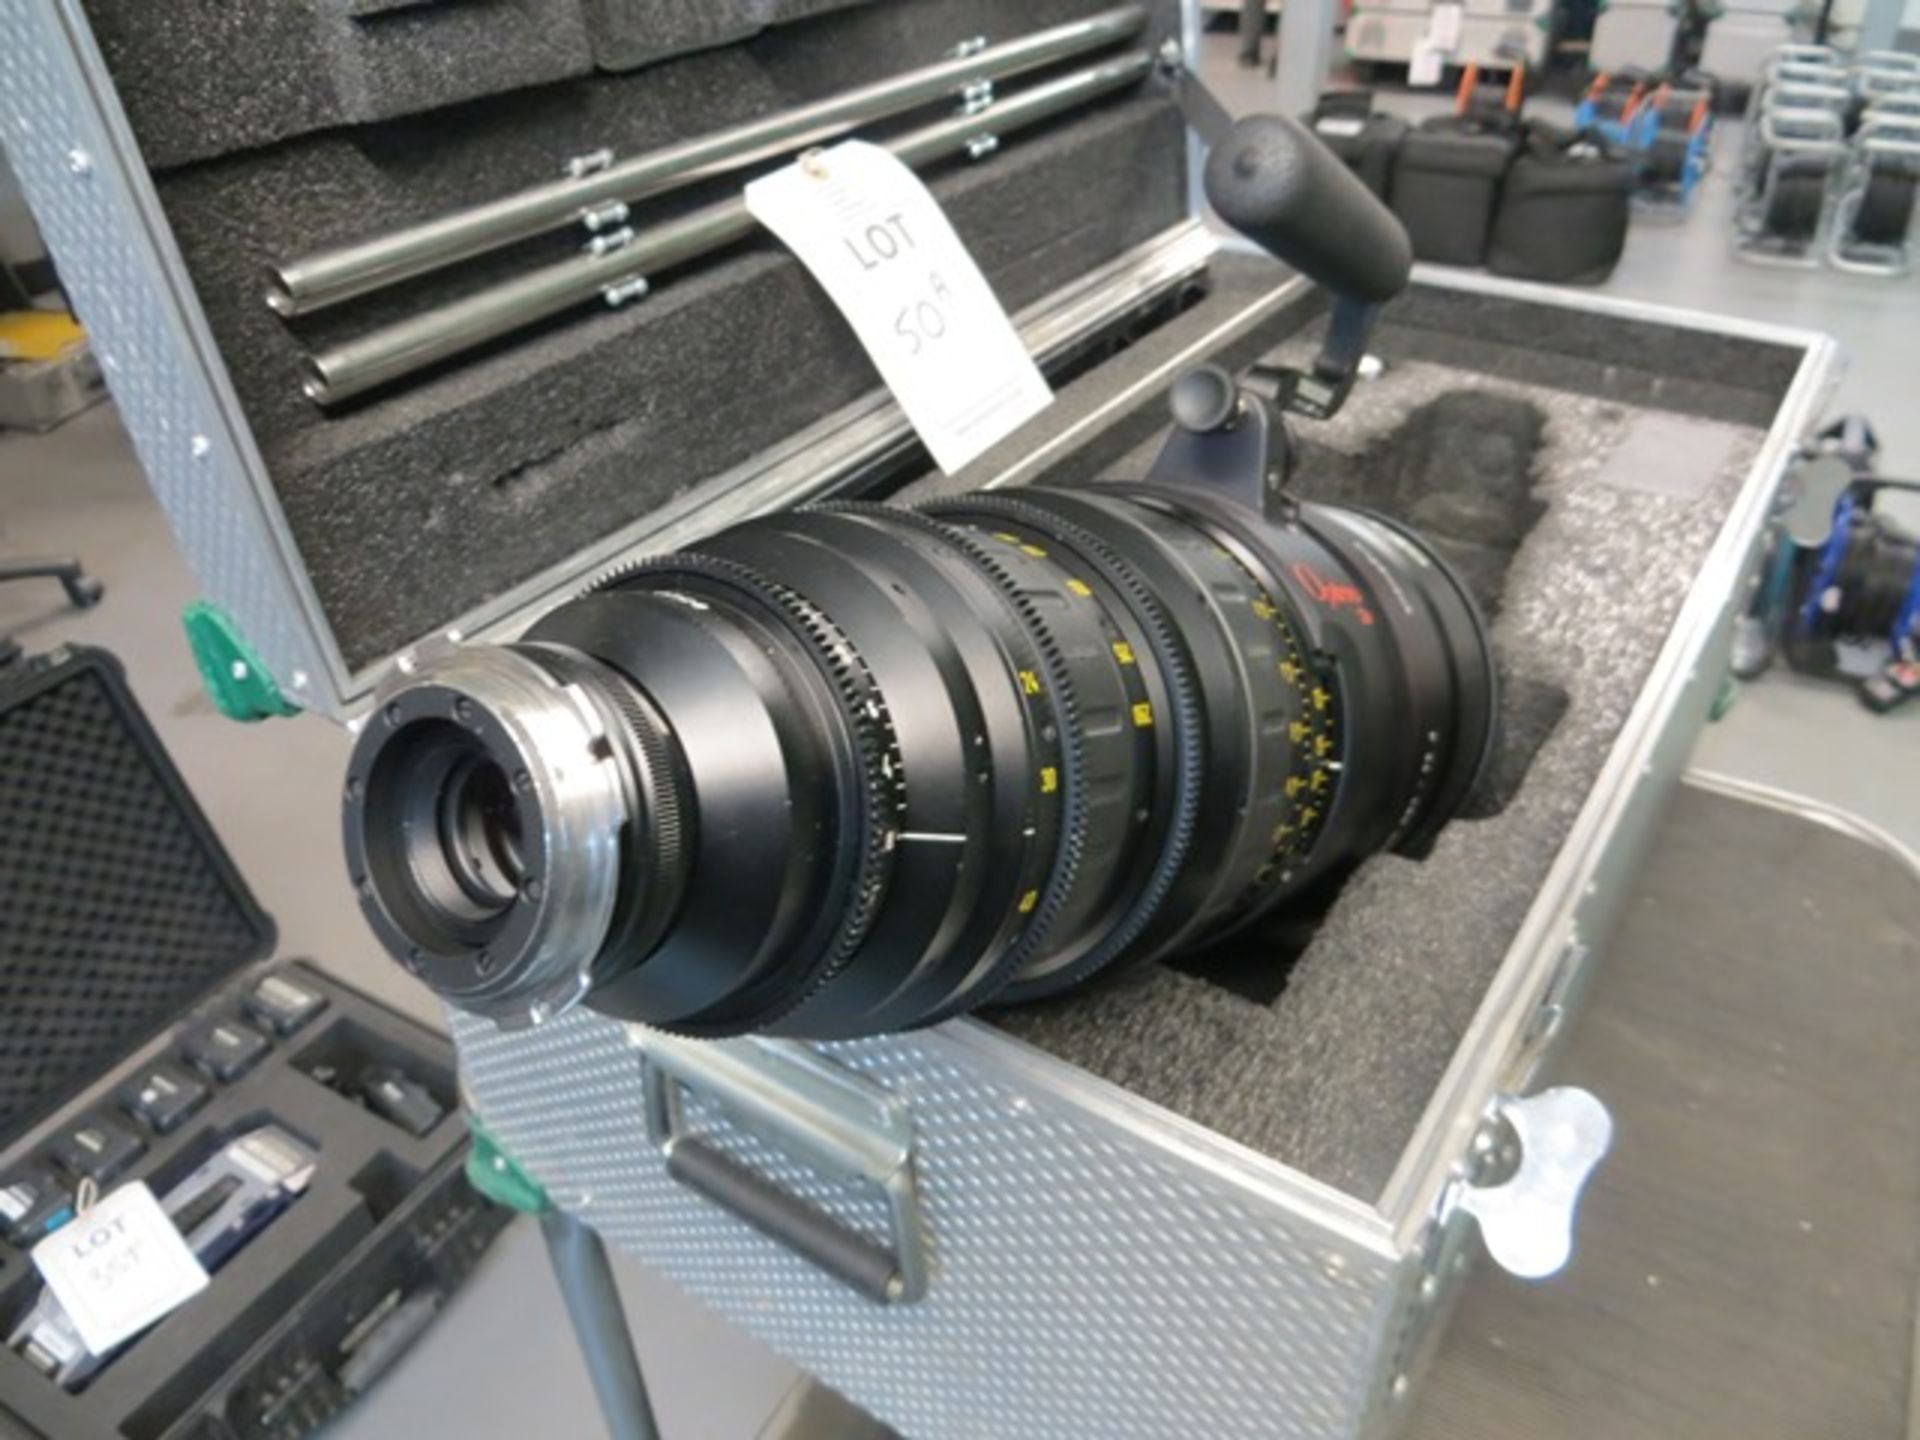 Angenieux F24 35mm Optimo 12X 24-290 PL Mount Feet Scale Zoom Lens s/n 2062028 - Image 4 of 4